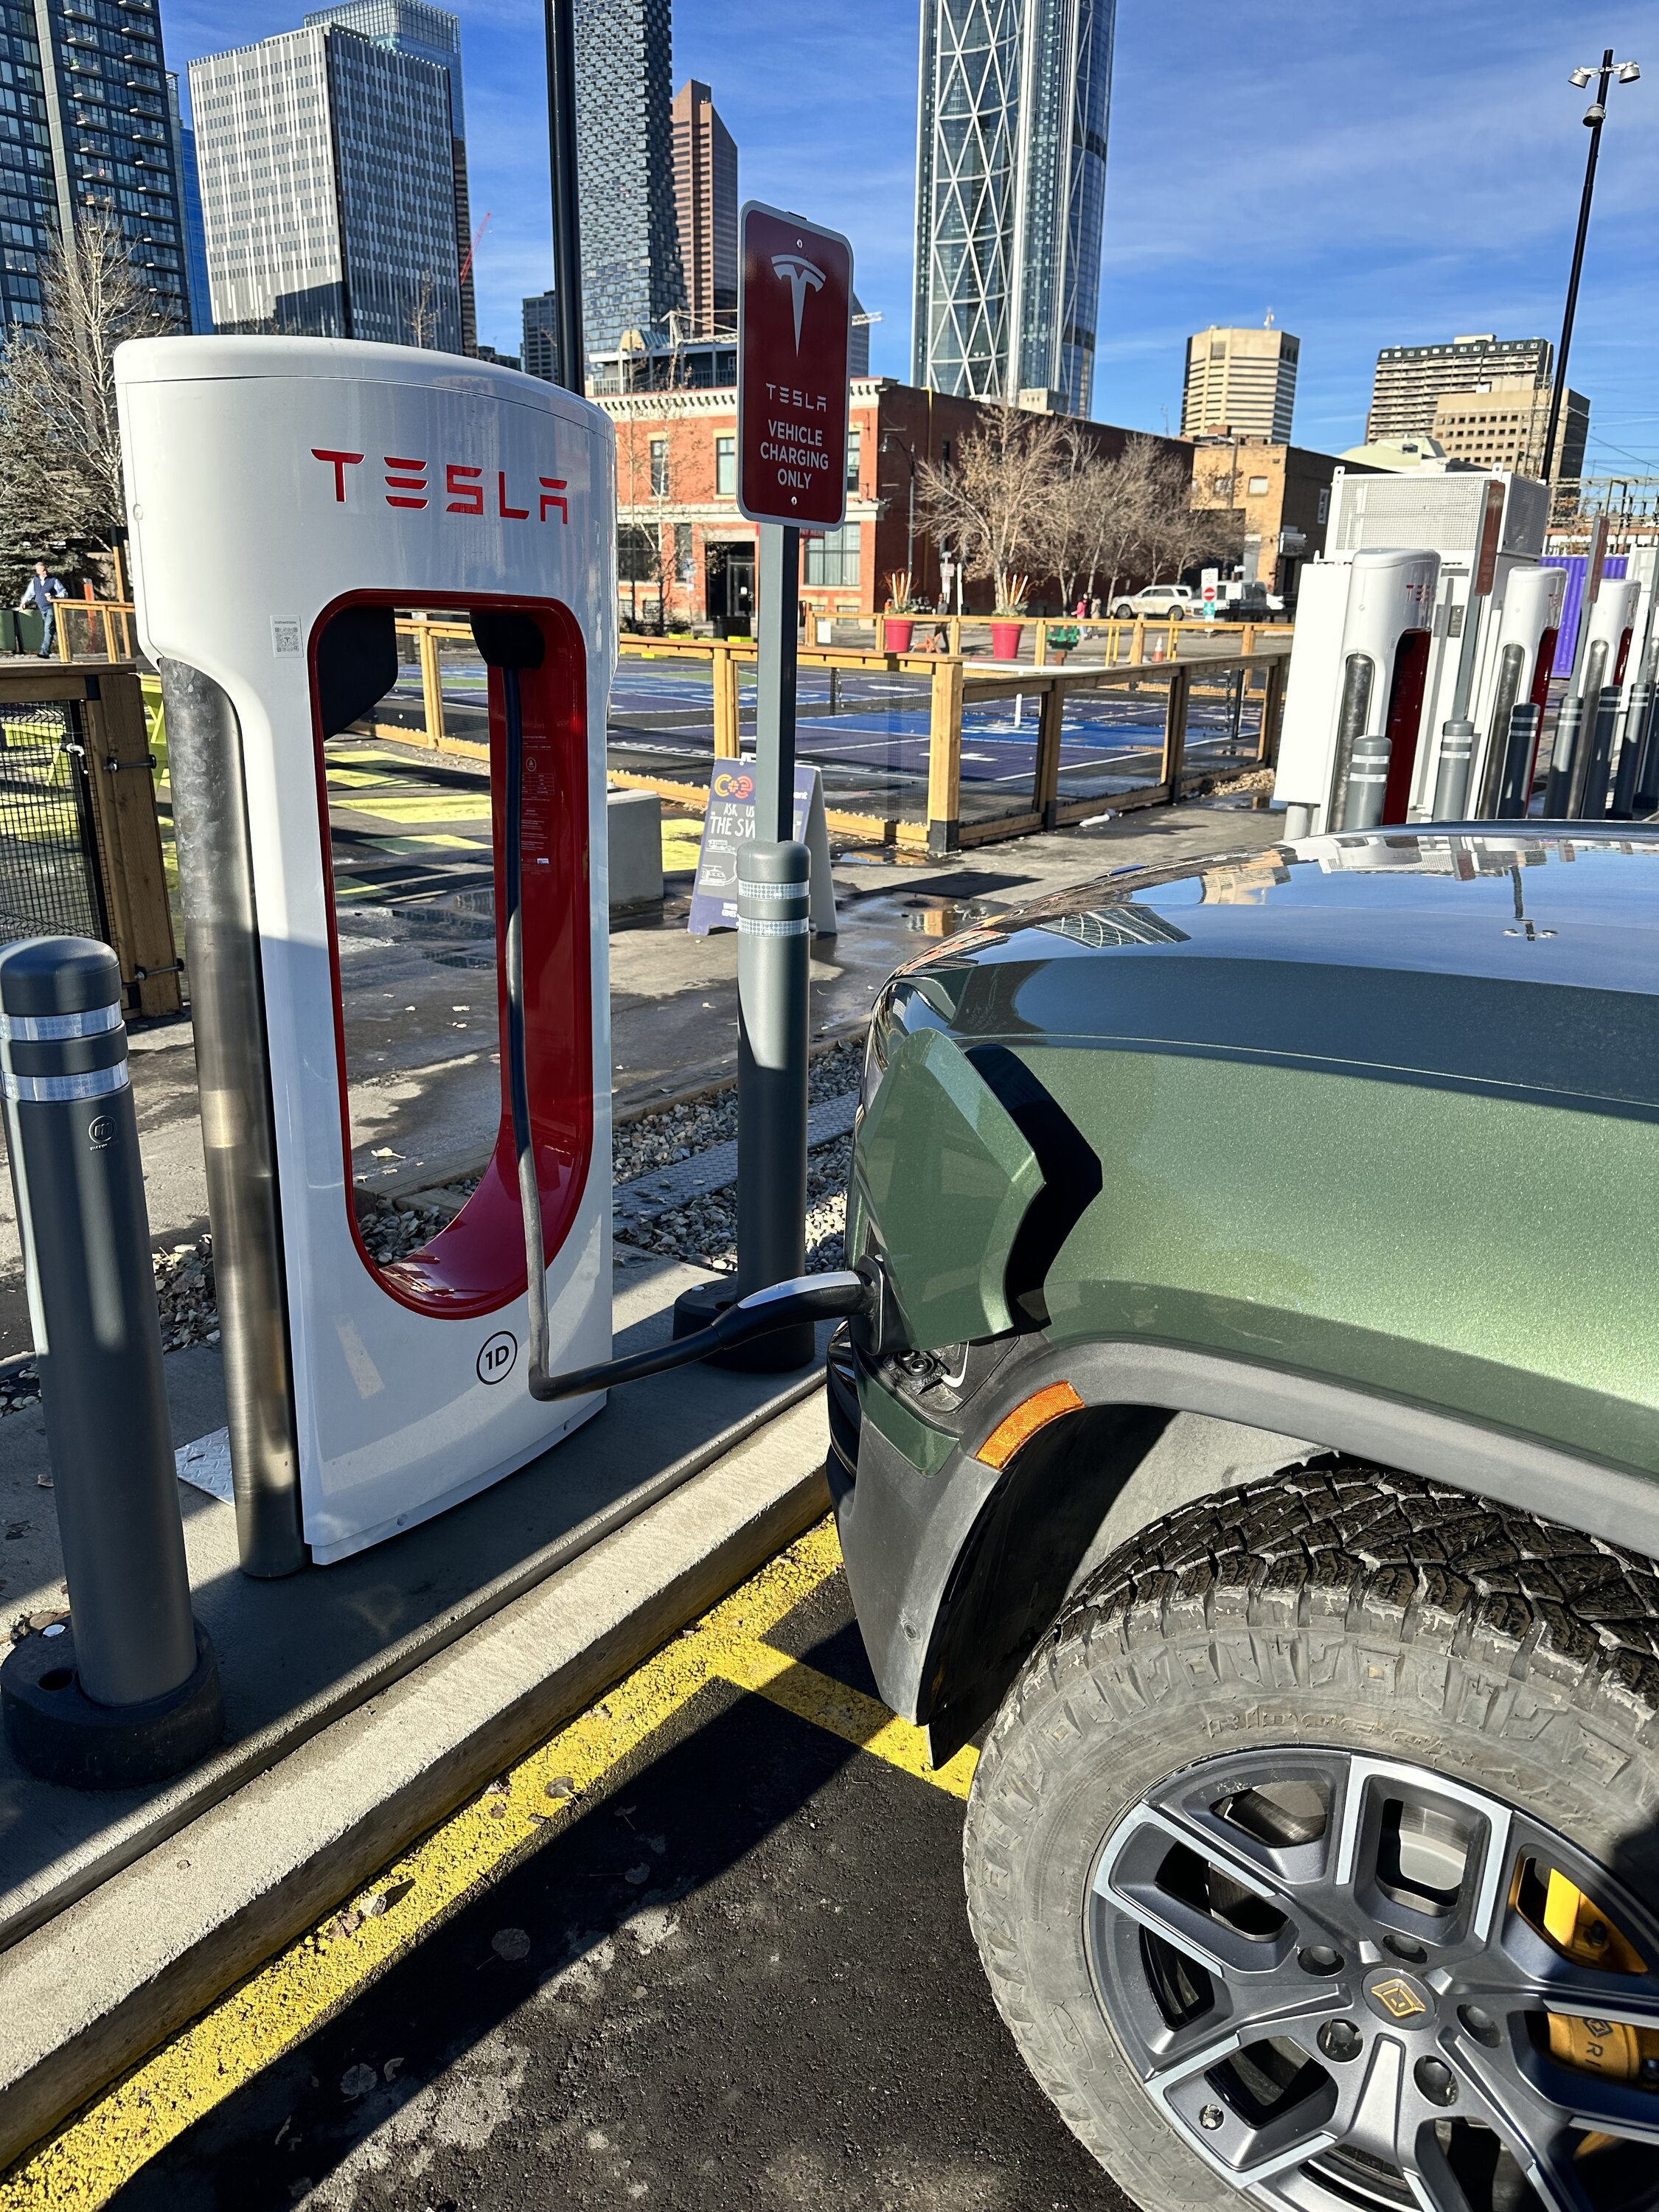 Rivian R1T R1S Tesla charger in Calgary open to non-Tesla IMG_4335